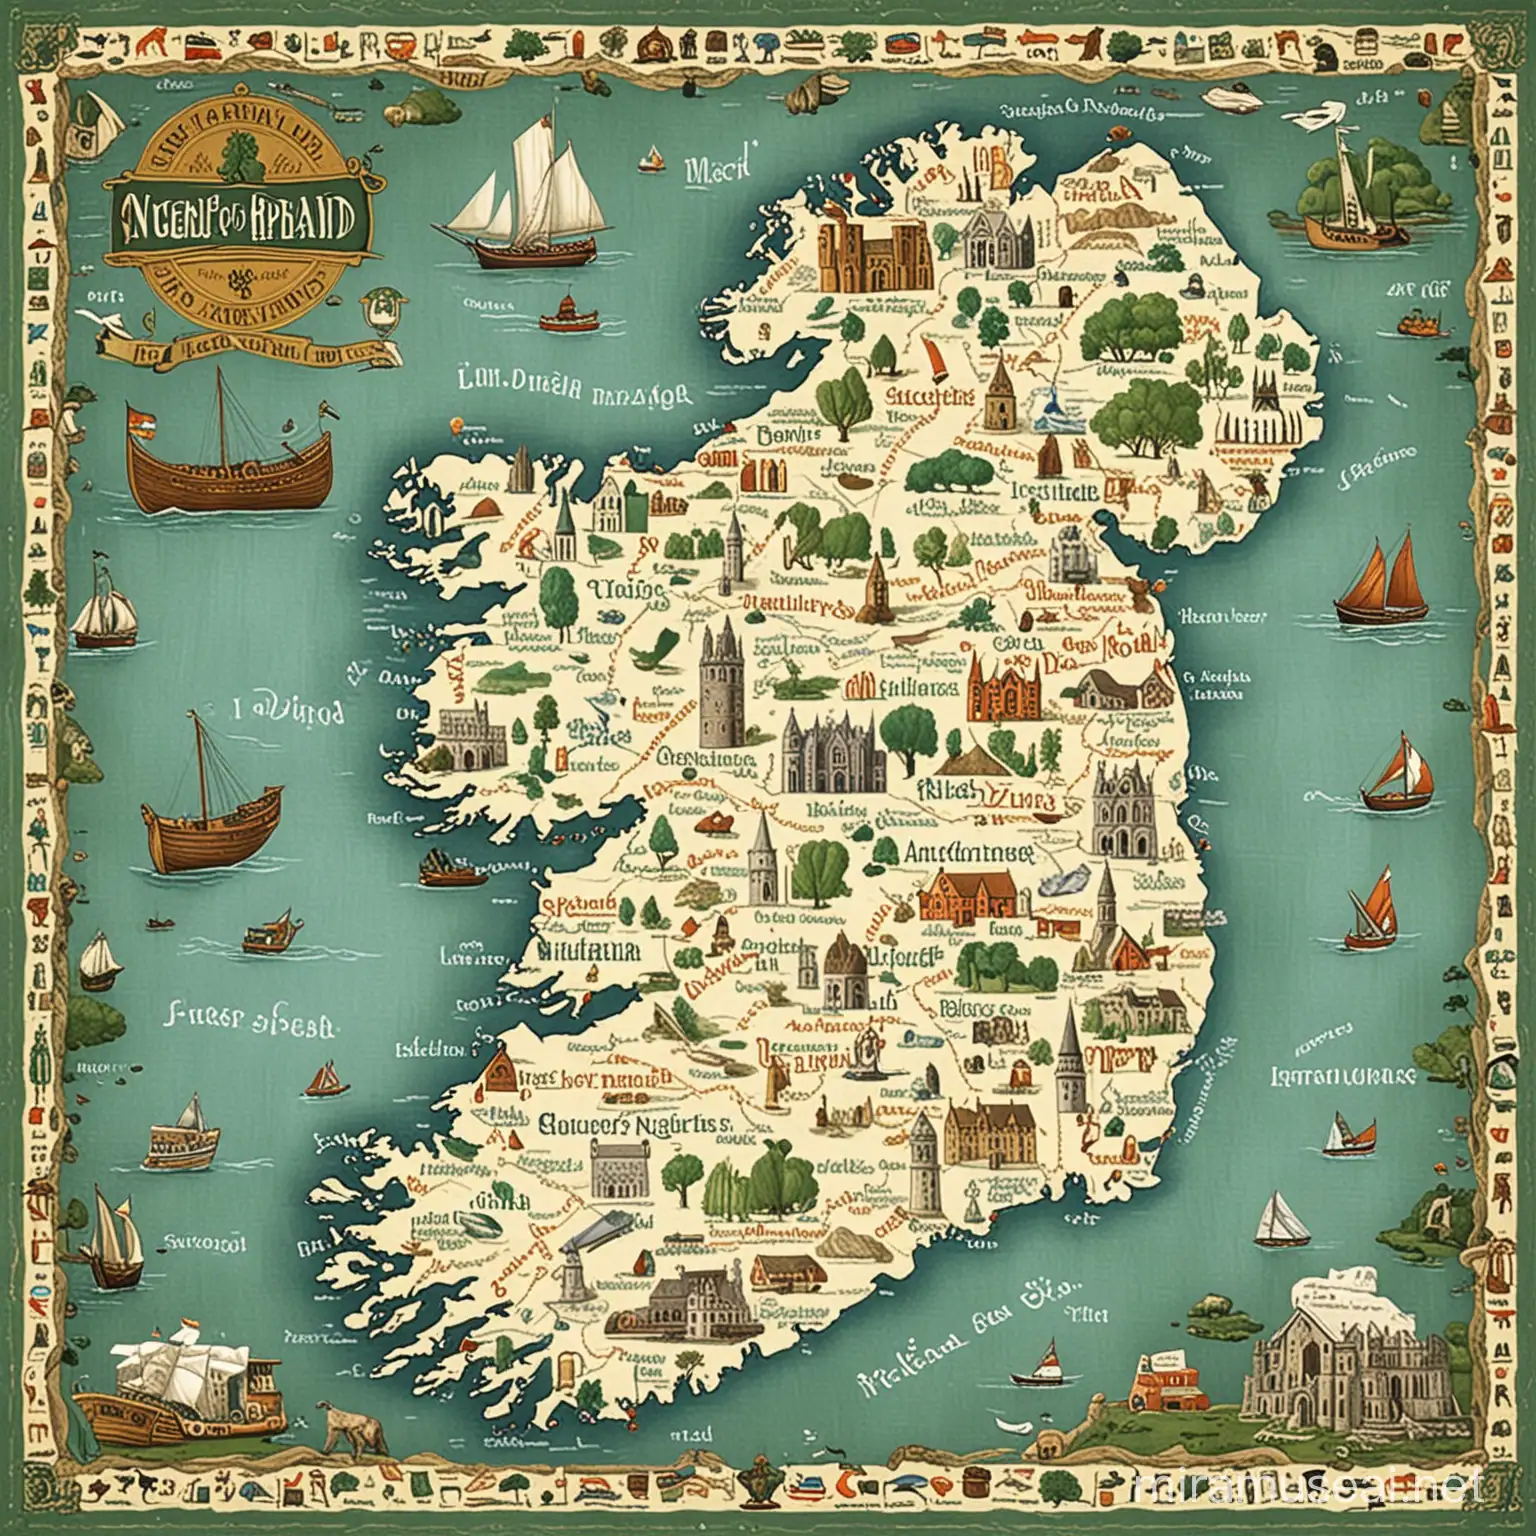 Famous Irish Landmarks Illustrated Discovering the Rich Tapestry of Ireland